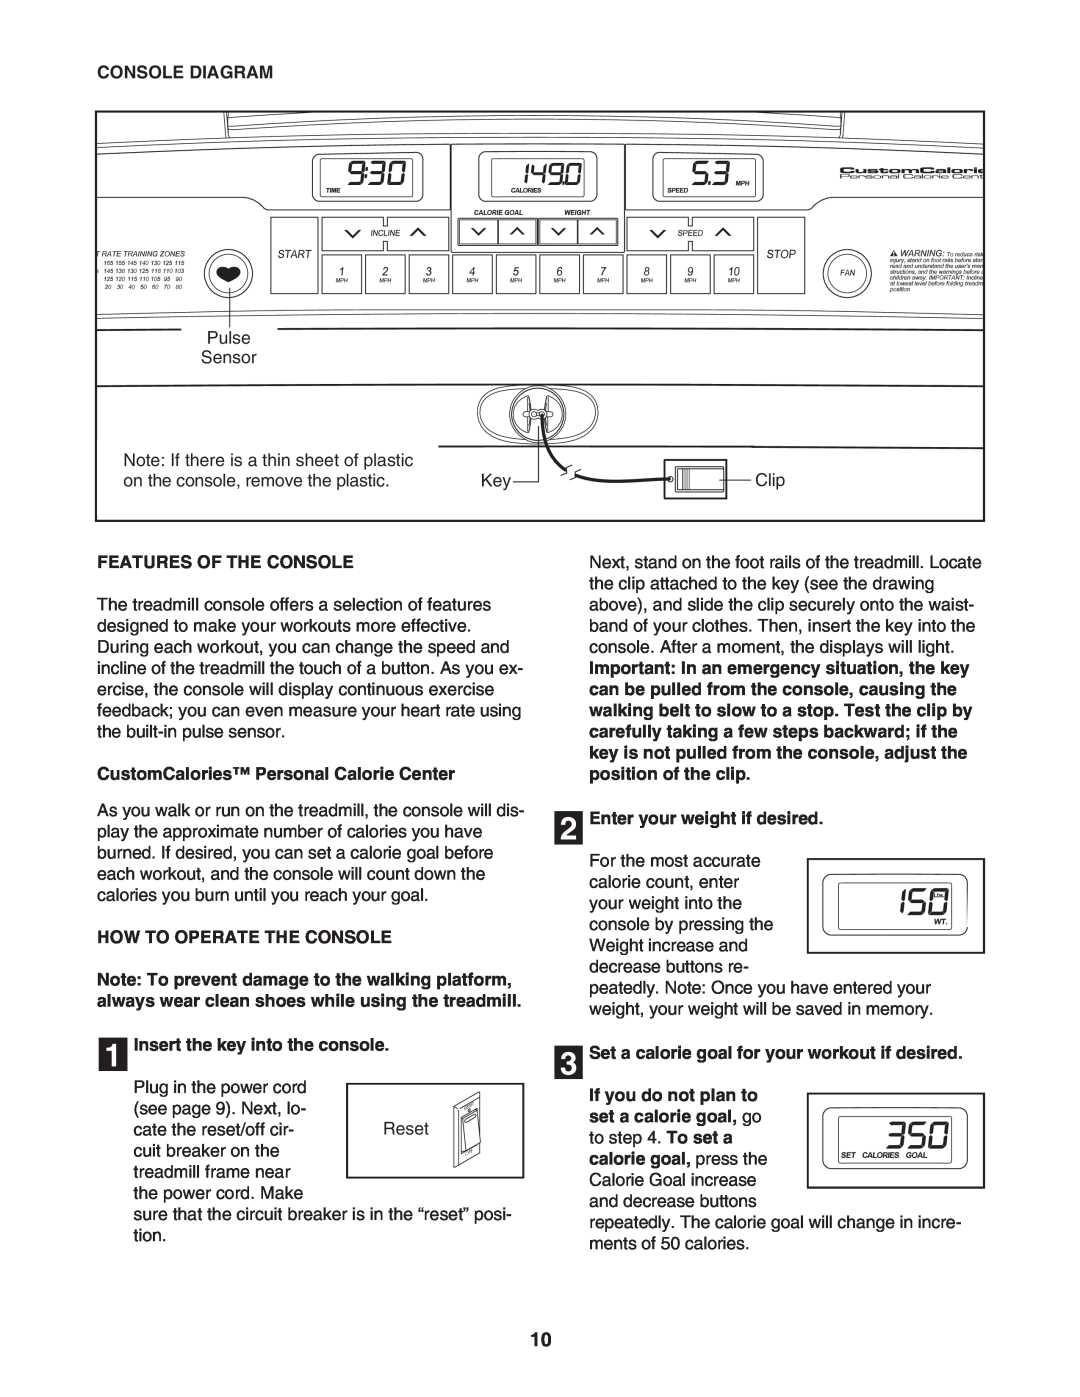 ProForm PFTL31105.1 user manual Console Diagram, Features Of The Console, CustomCalories Personal Calorie Center 